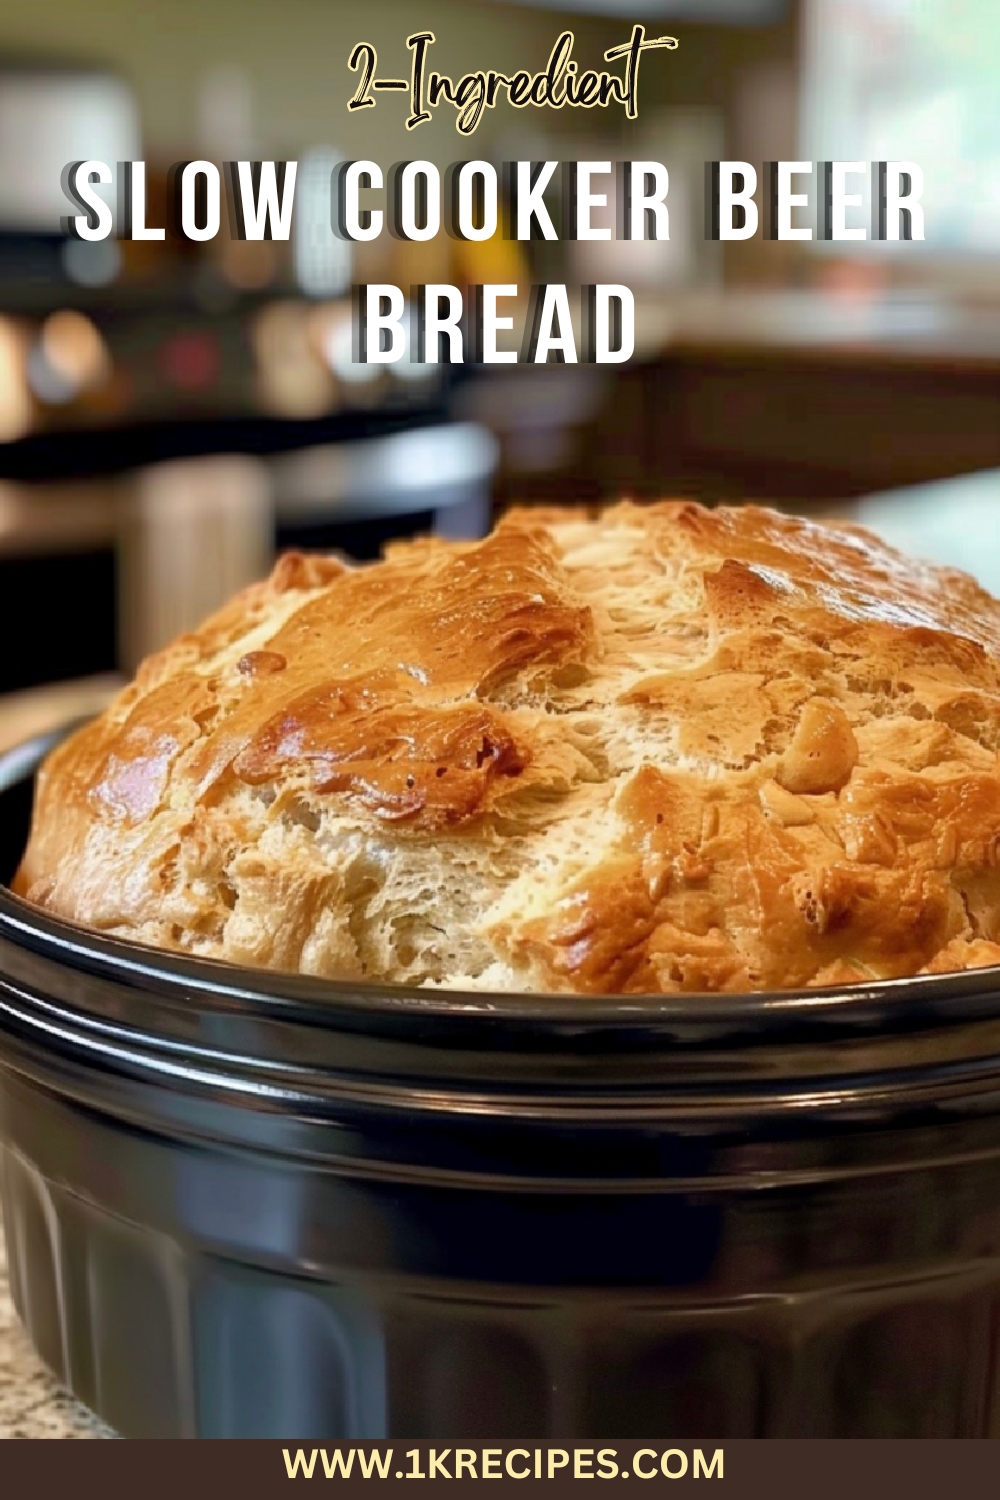 Dive into the simplicity of baking with this Slow Cooker Beer Bread recipe. Just 2 ingredients for a perfect, comforting loaf every time. Pin this for an easy, go-to bread recipe that’s both delicious and foolproof!